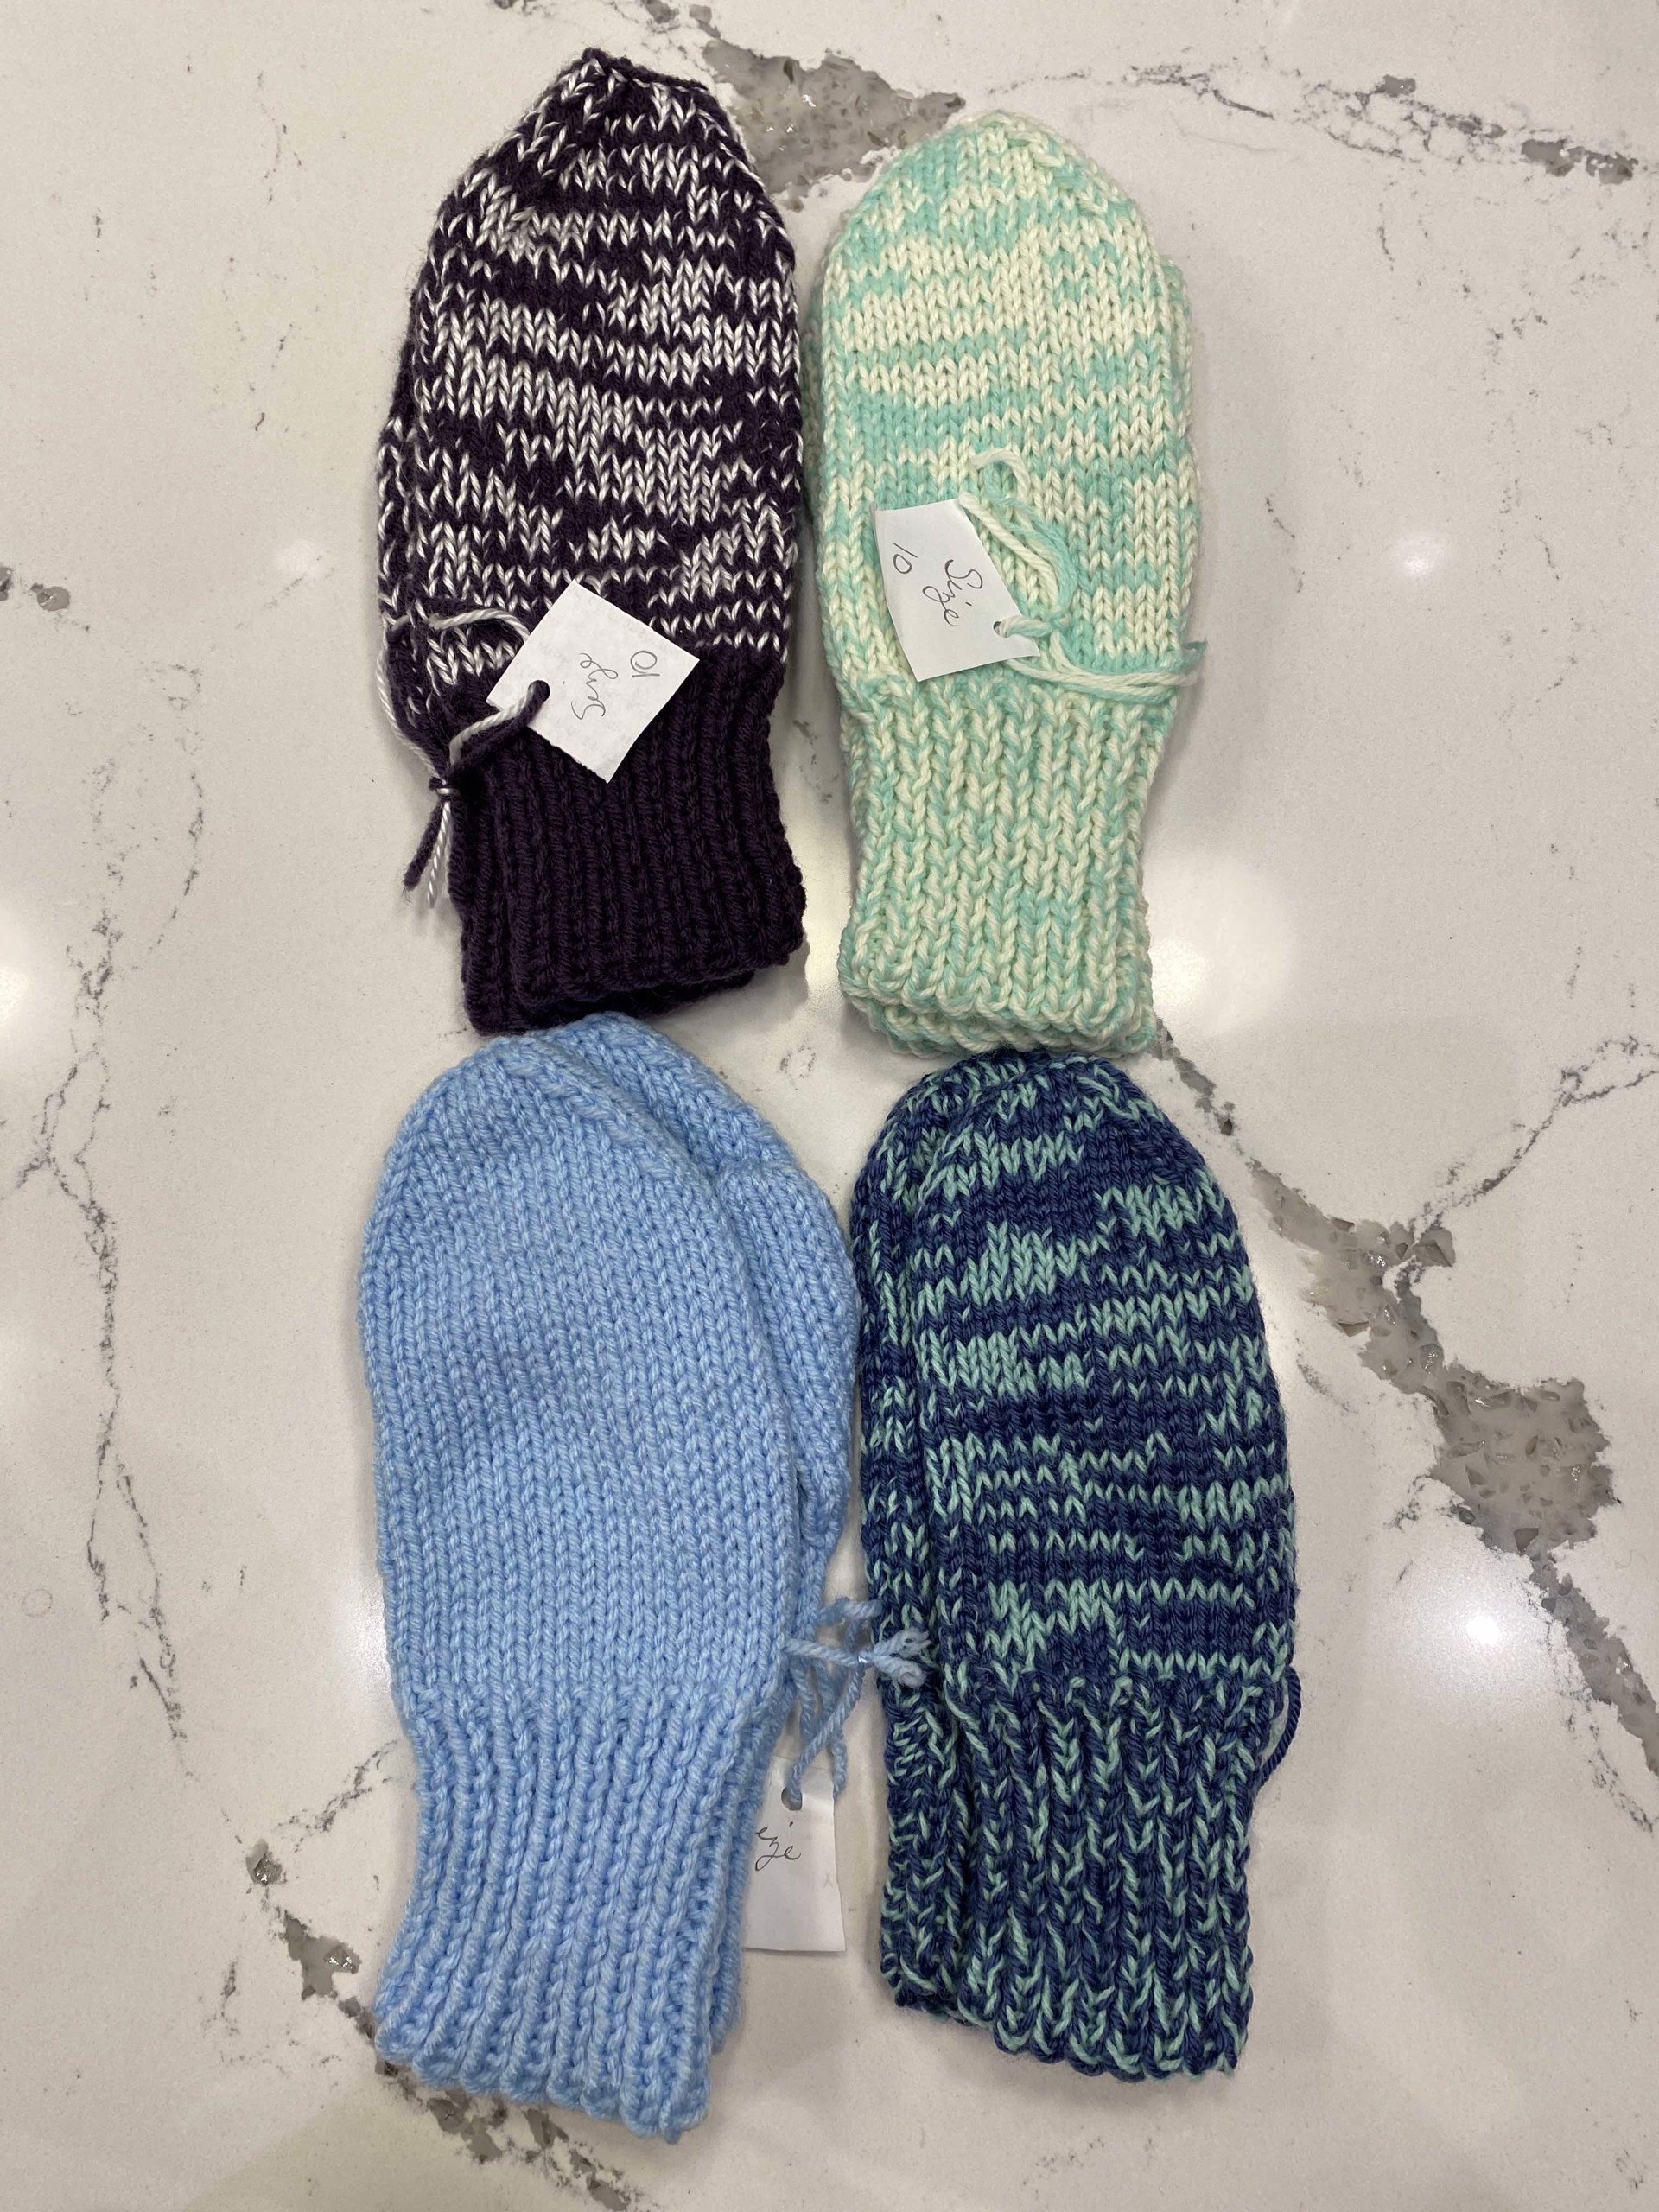 Handmade Mittens - Size 10 by Cathy Miller